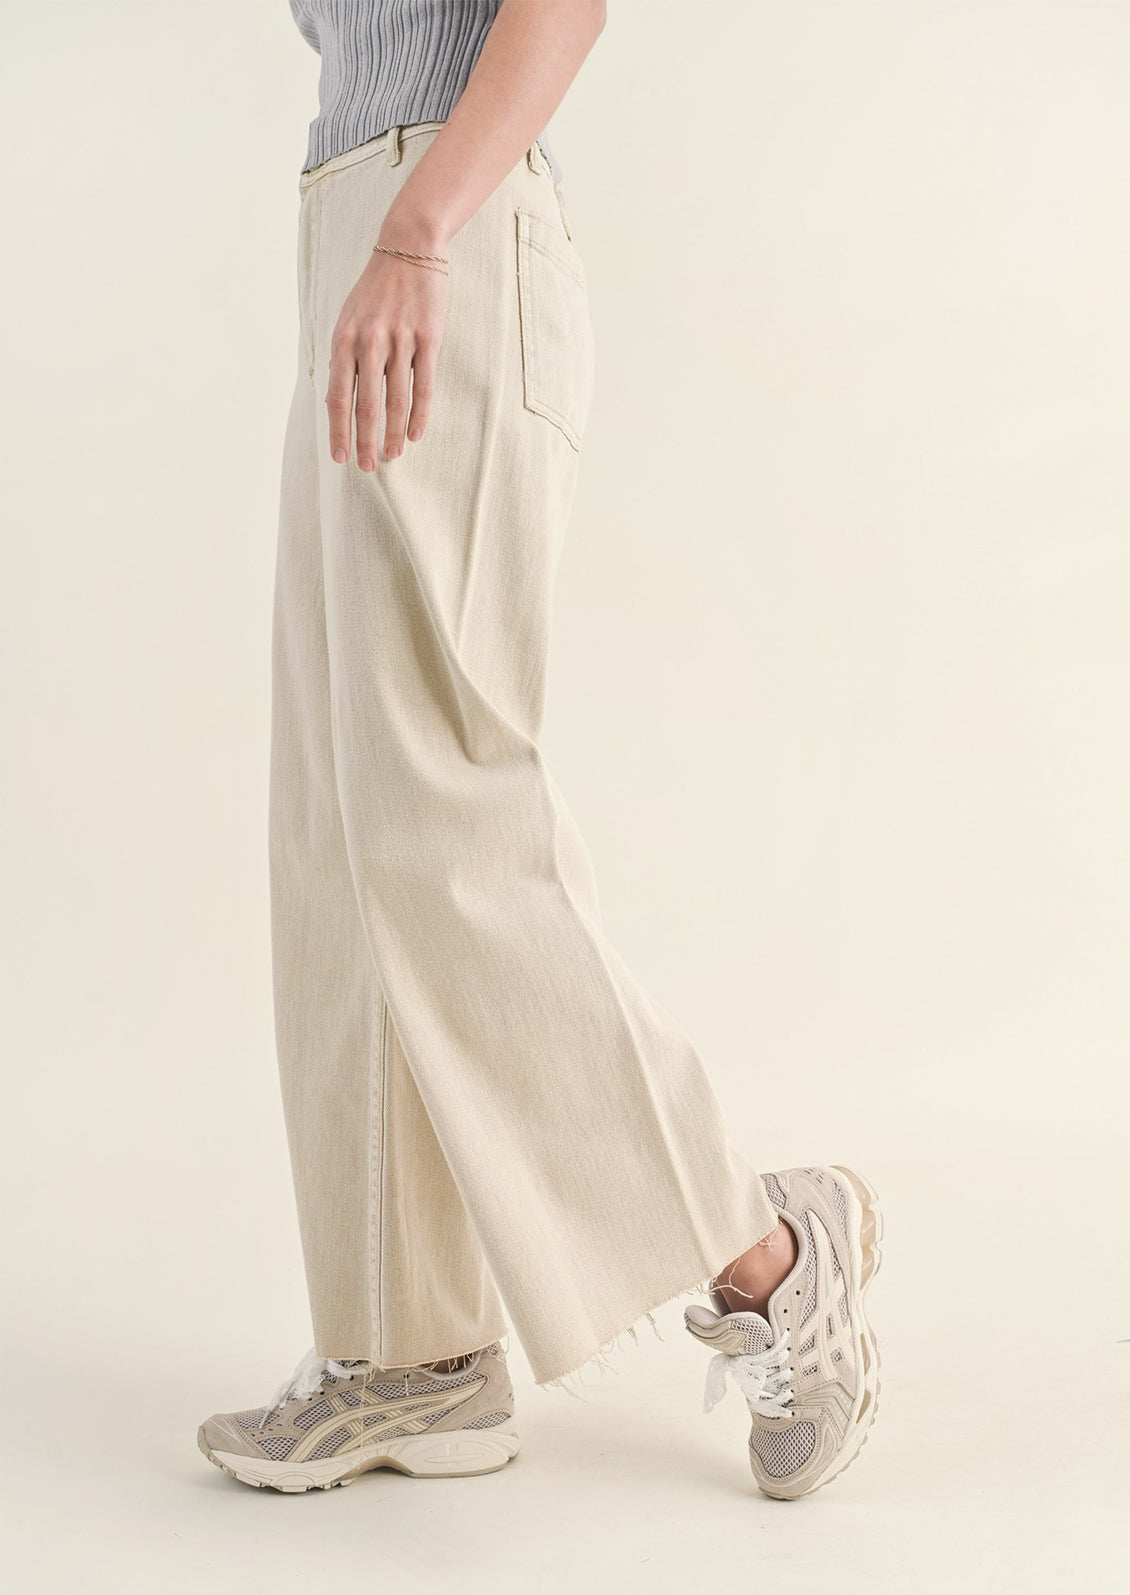 A pair of beige colored wide leg pants with belt loops.